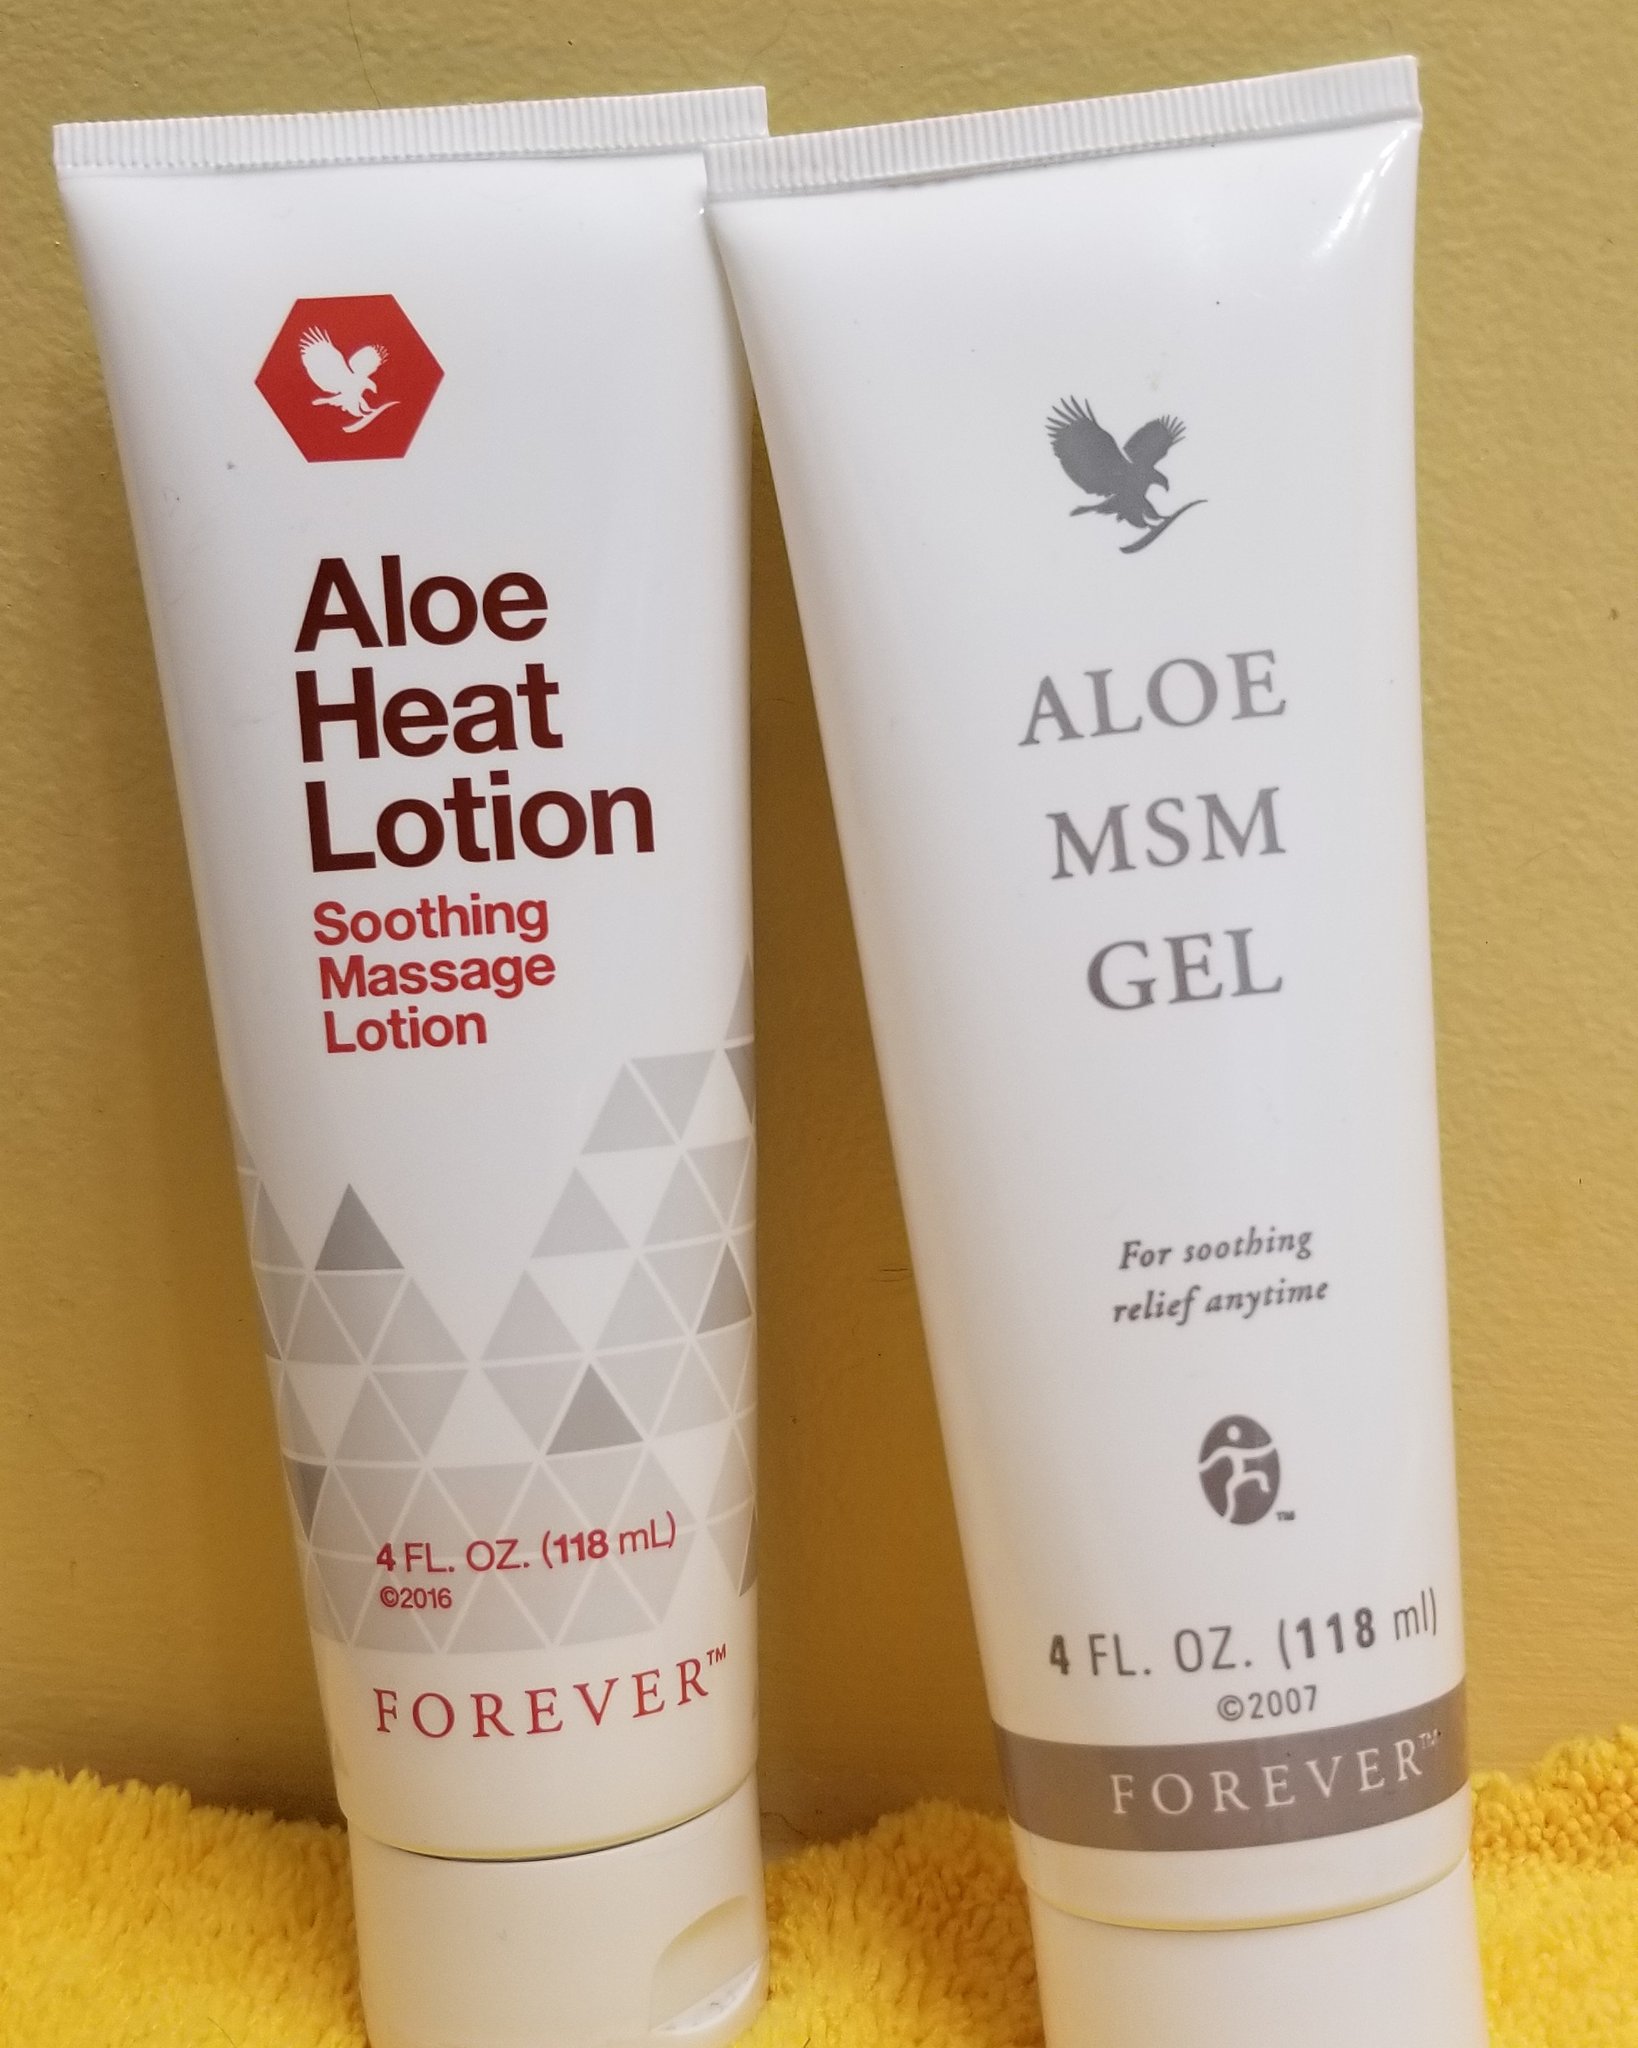 Emily Gladys on Twitter: "Happy Wednesday, otherwise known has hump day. Today will be a quiet day at home resting with my two best friends Aloe lotion &amp; Aloe MSM gel.